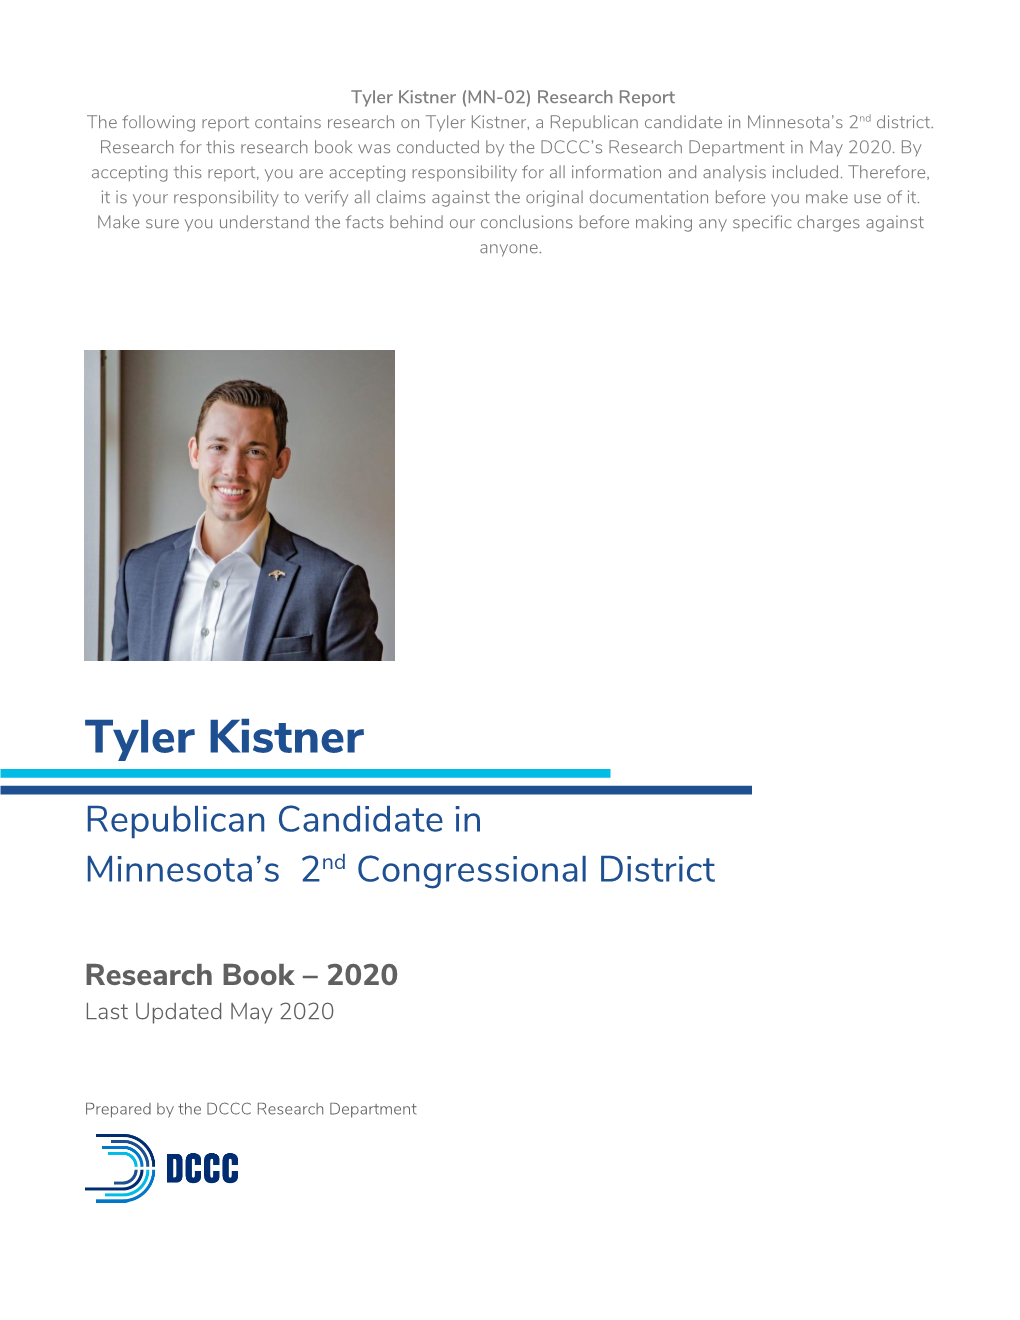 Tyler Kistner (MN-02) Research Report the Following Report Contains Research on Tyler Kistner, a Republican Candidate in Minnesota’S 2Nd District